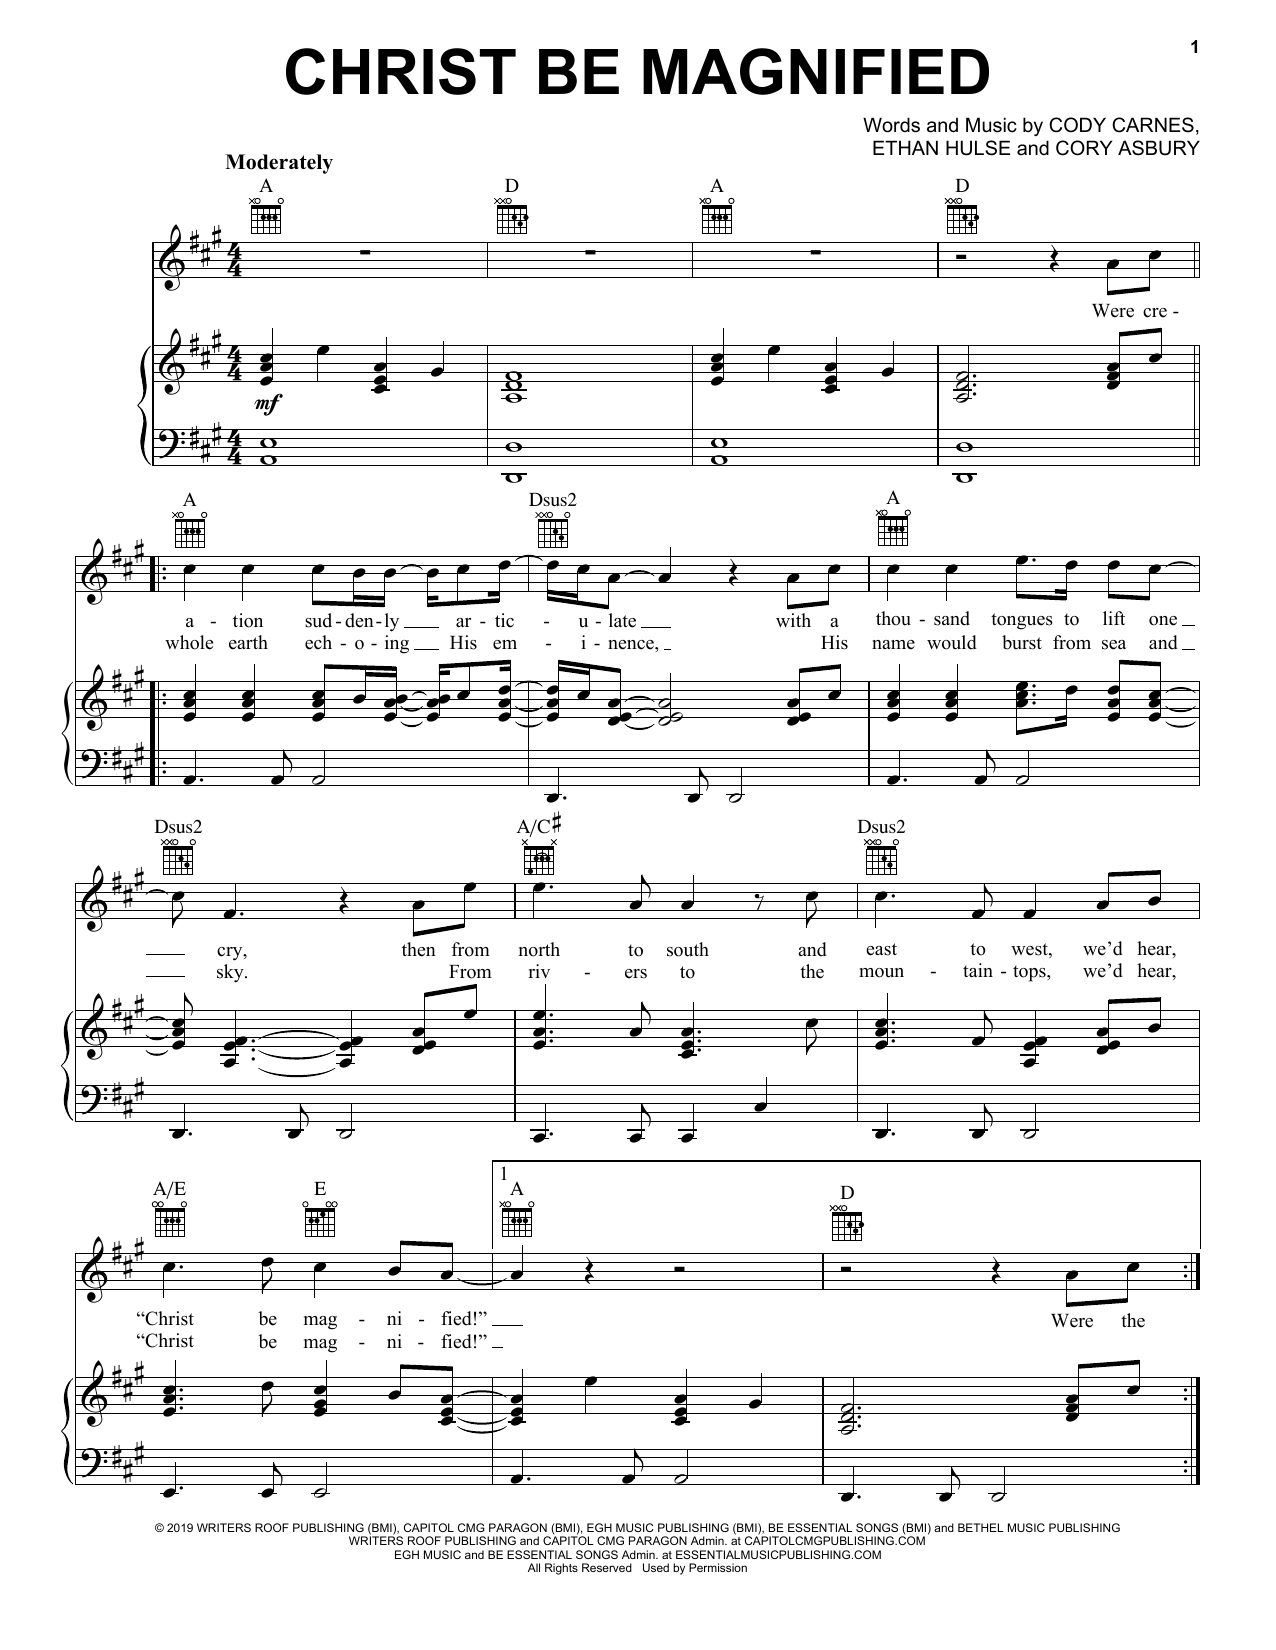 Download Cody Carnes Christ Be Magnified Sheet Music